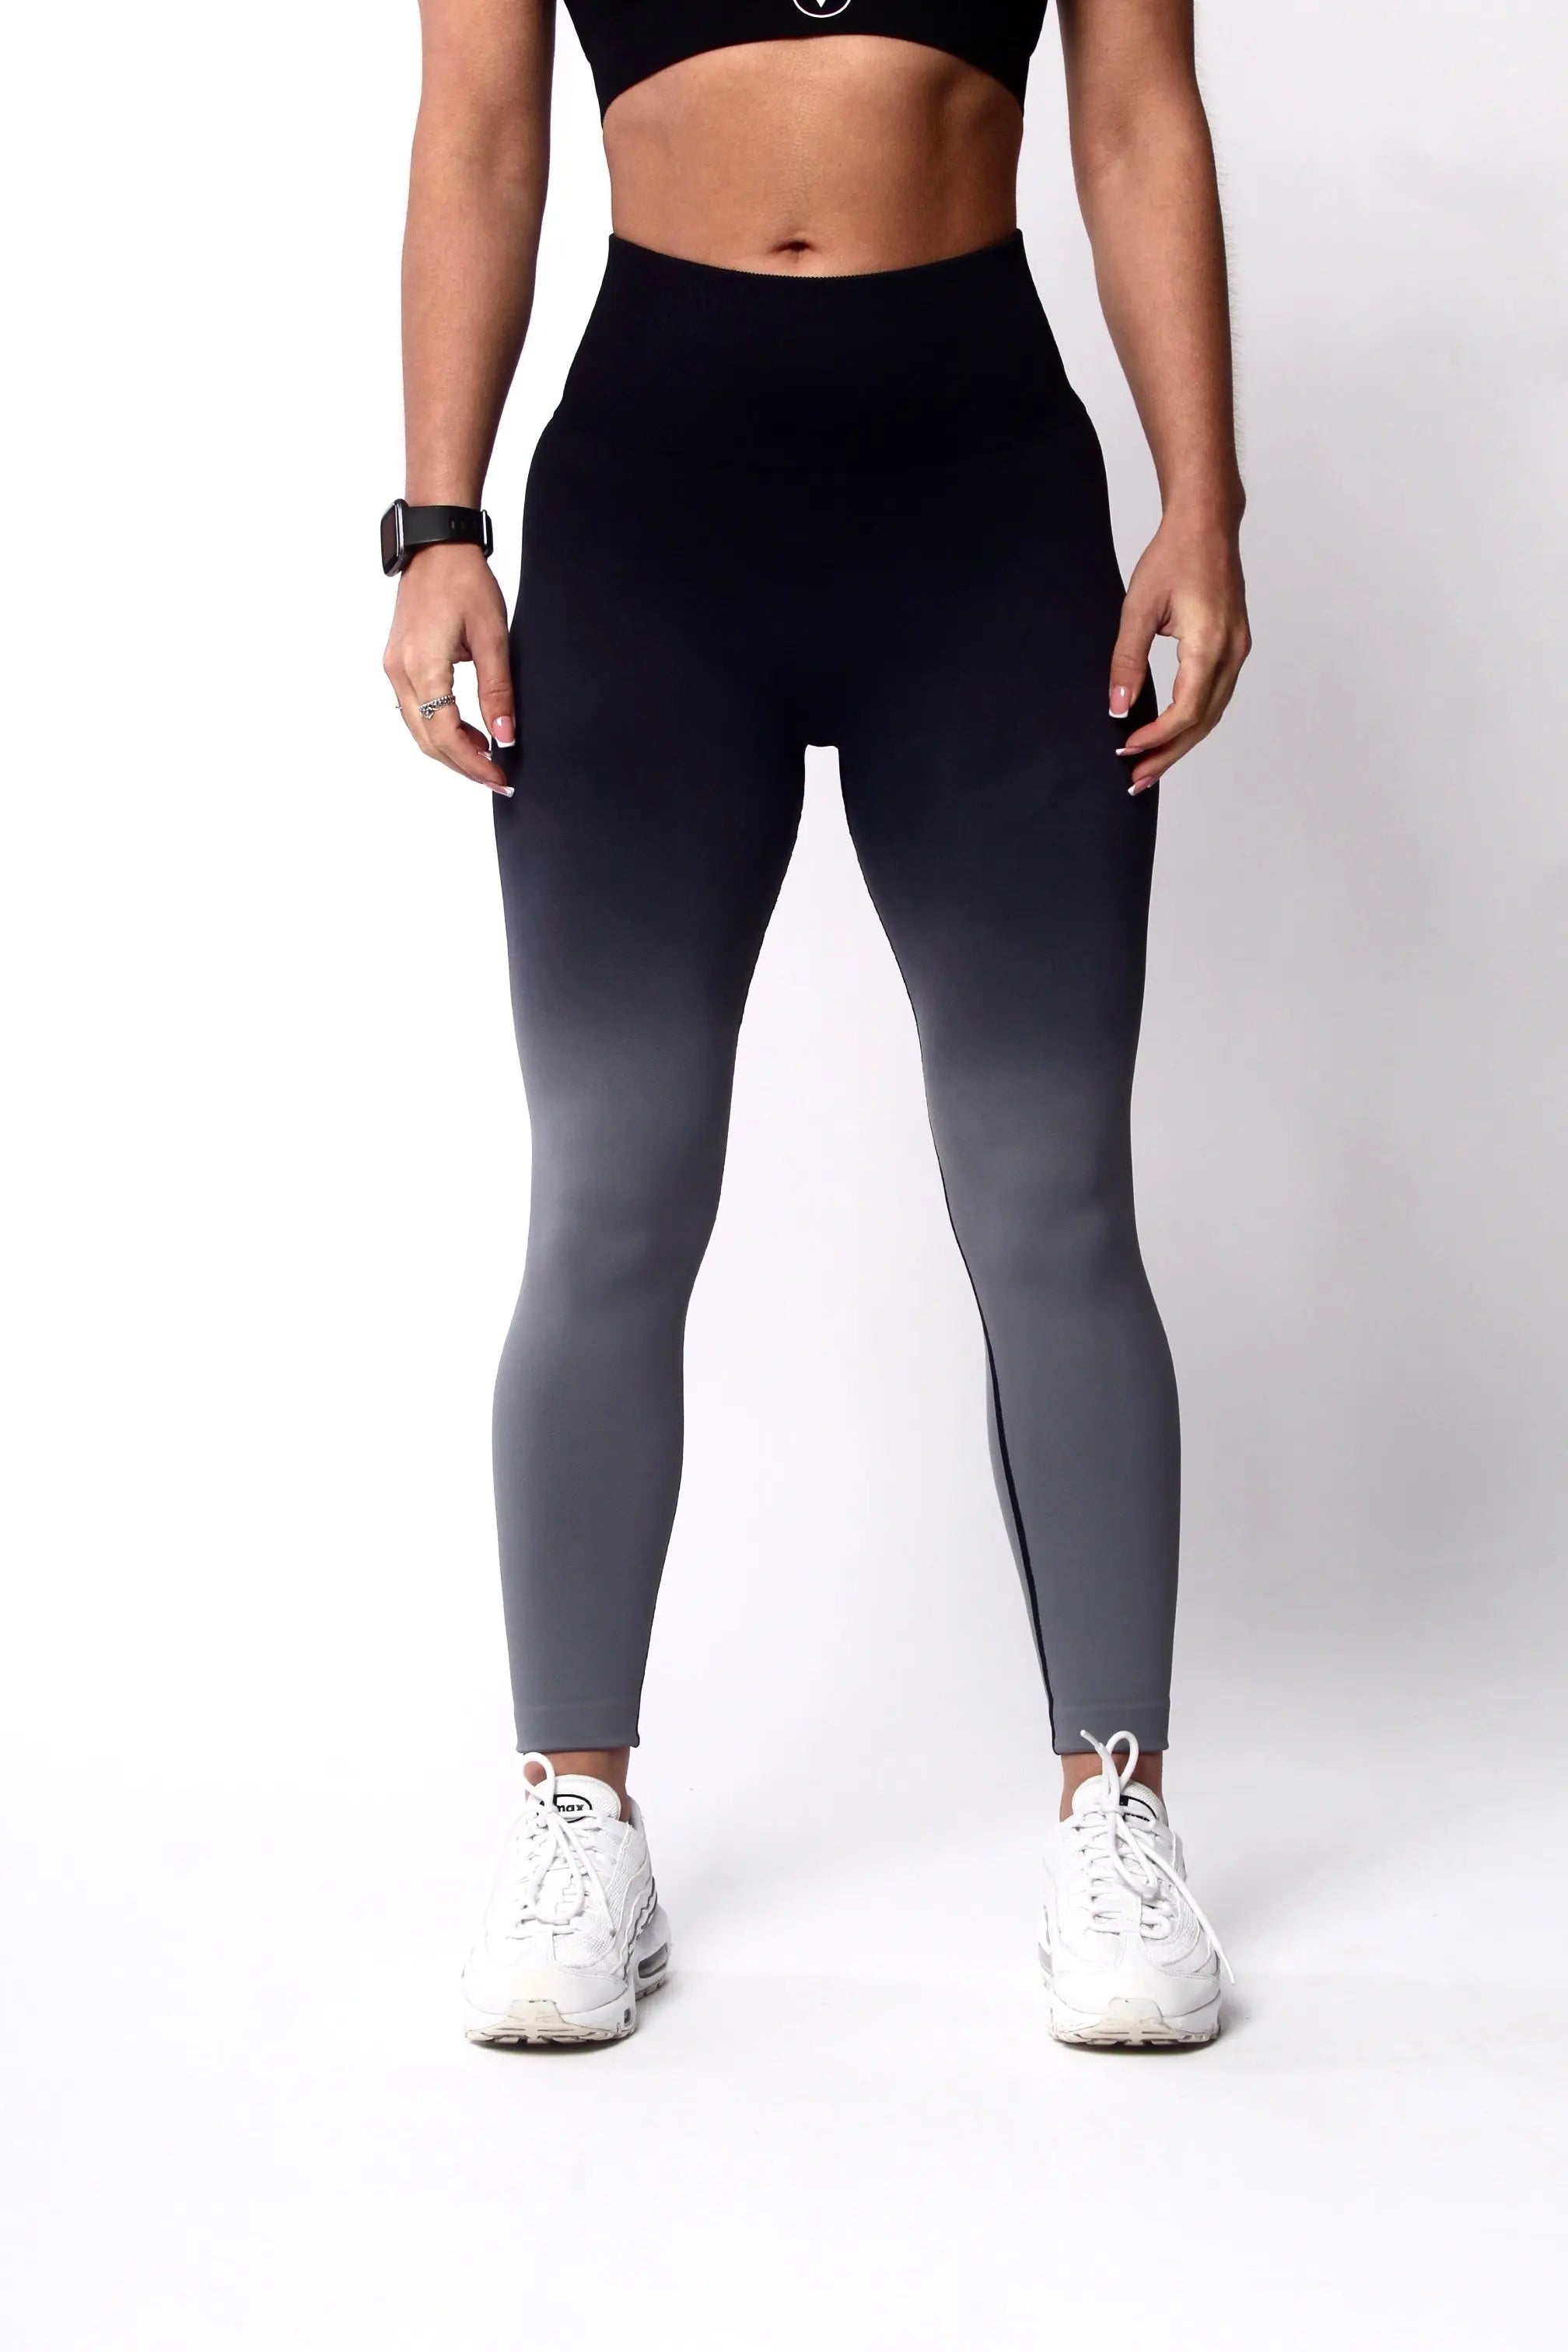 https://empowerclothing.co.uk/cdn/shop/files/Ombre-Collection---Scrunch-Bum-Gym-Leggings-In-Black-and-Grey-Empowerclothingltd-Empowerclothingltd-1684499507.jpg?v=1684499508